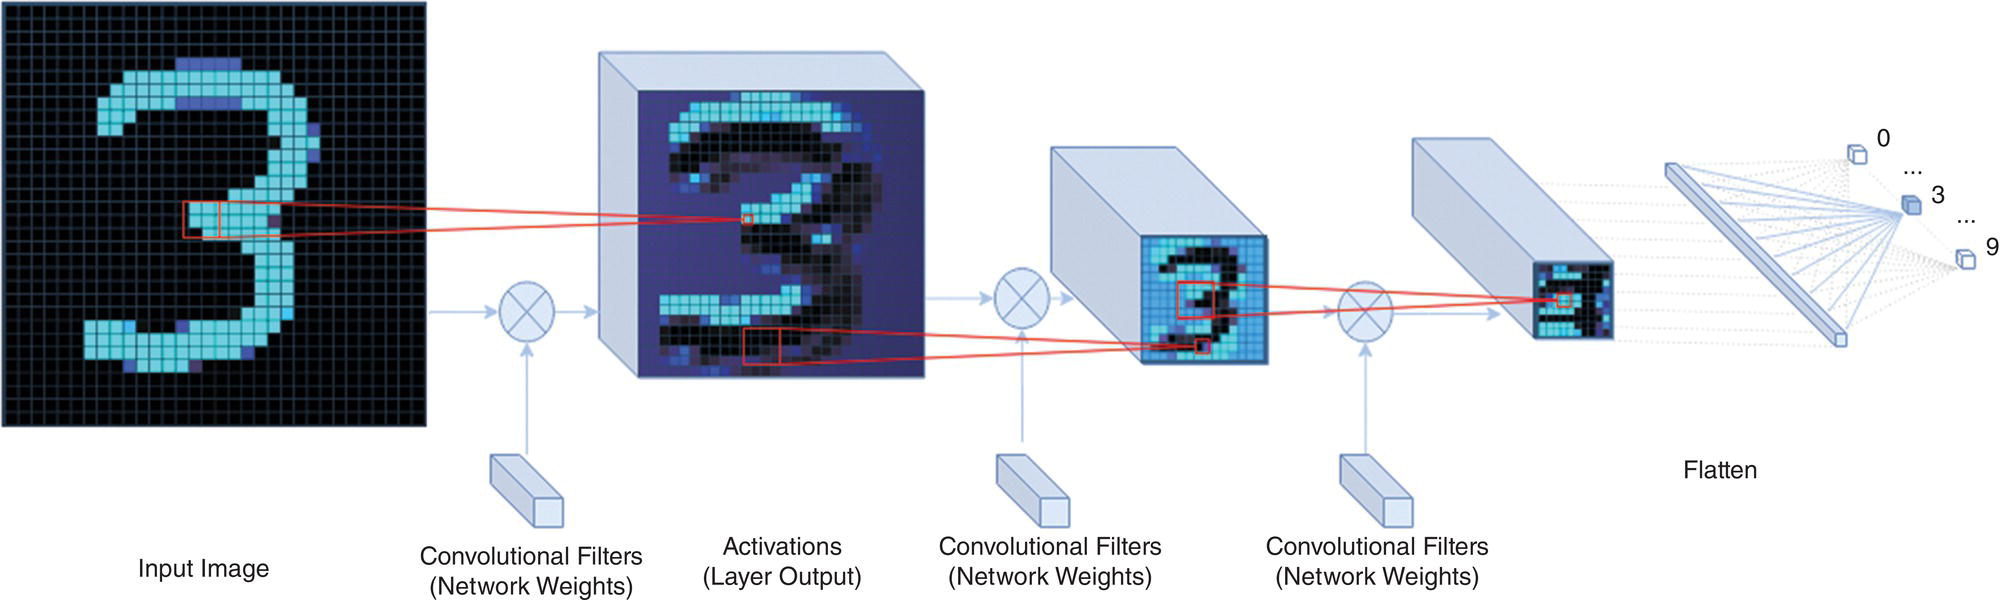 Schematic illustration of structure of a convolutional neural network for classifying handwritten numbers.